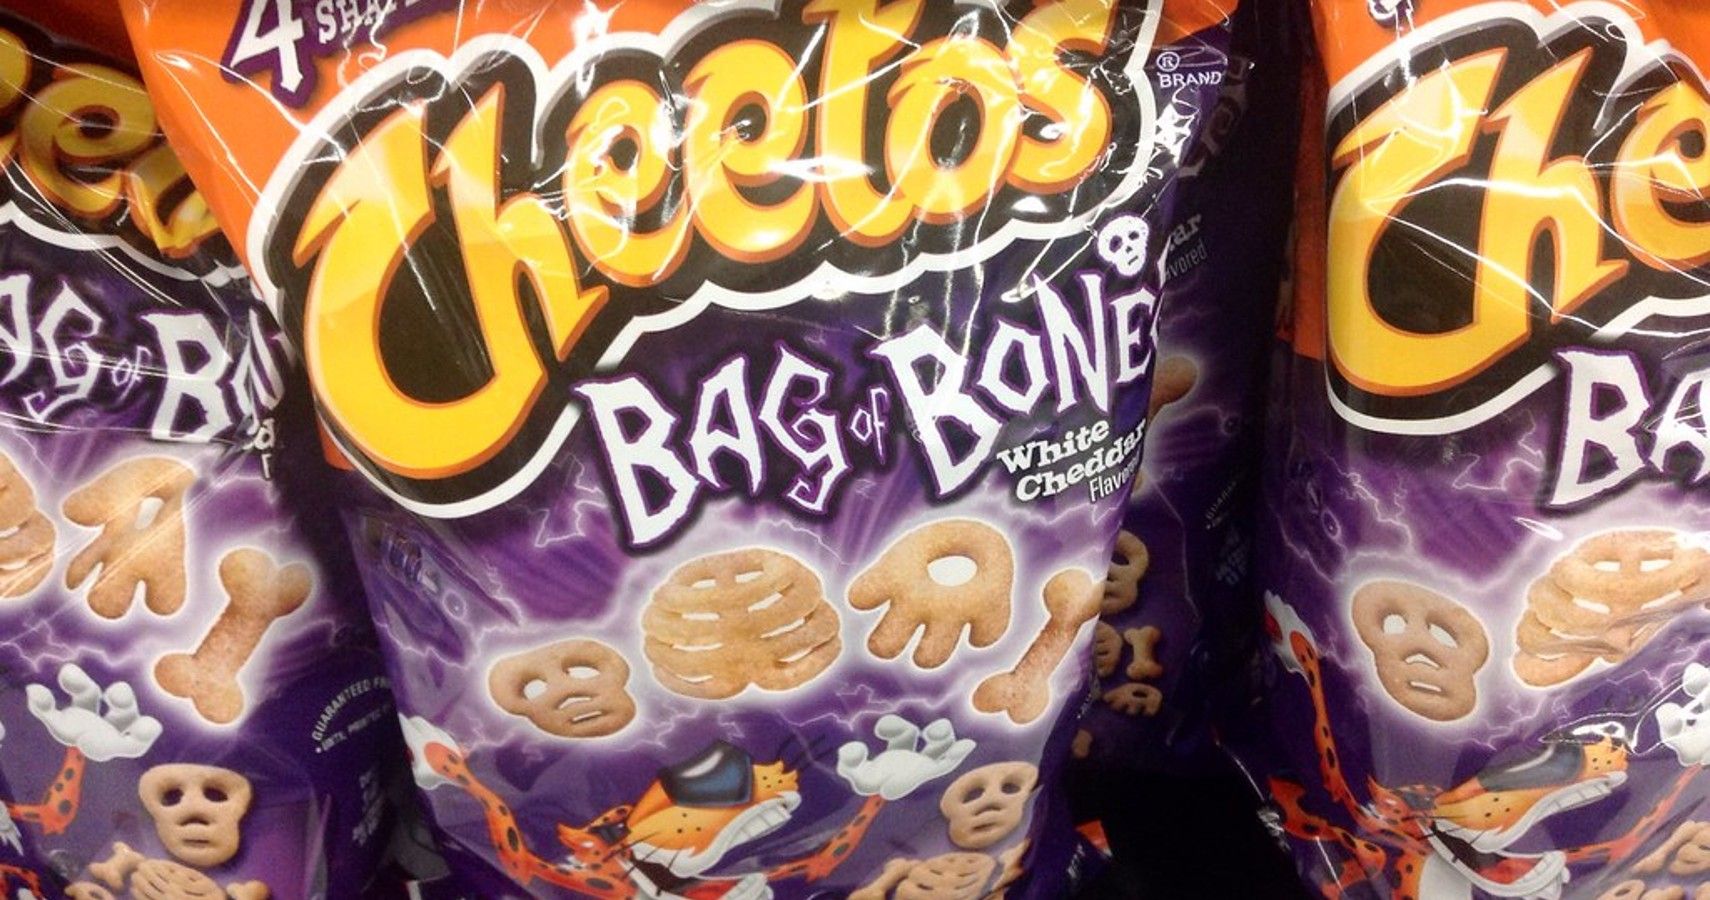 Cheetos Released A Delighfully Spooky Snack That Screams Halloween